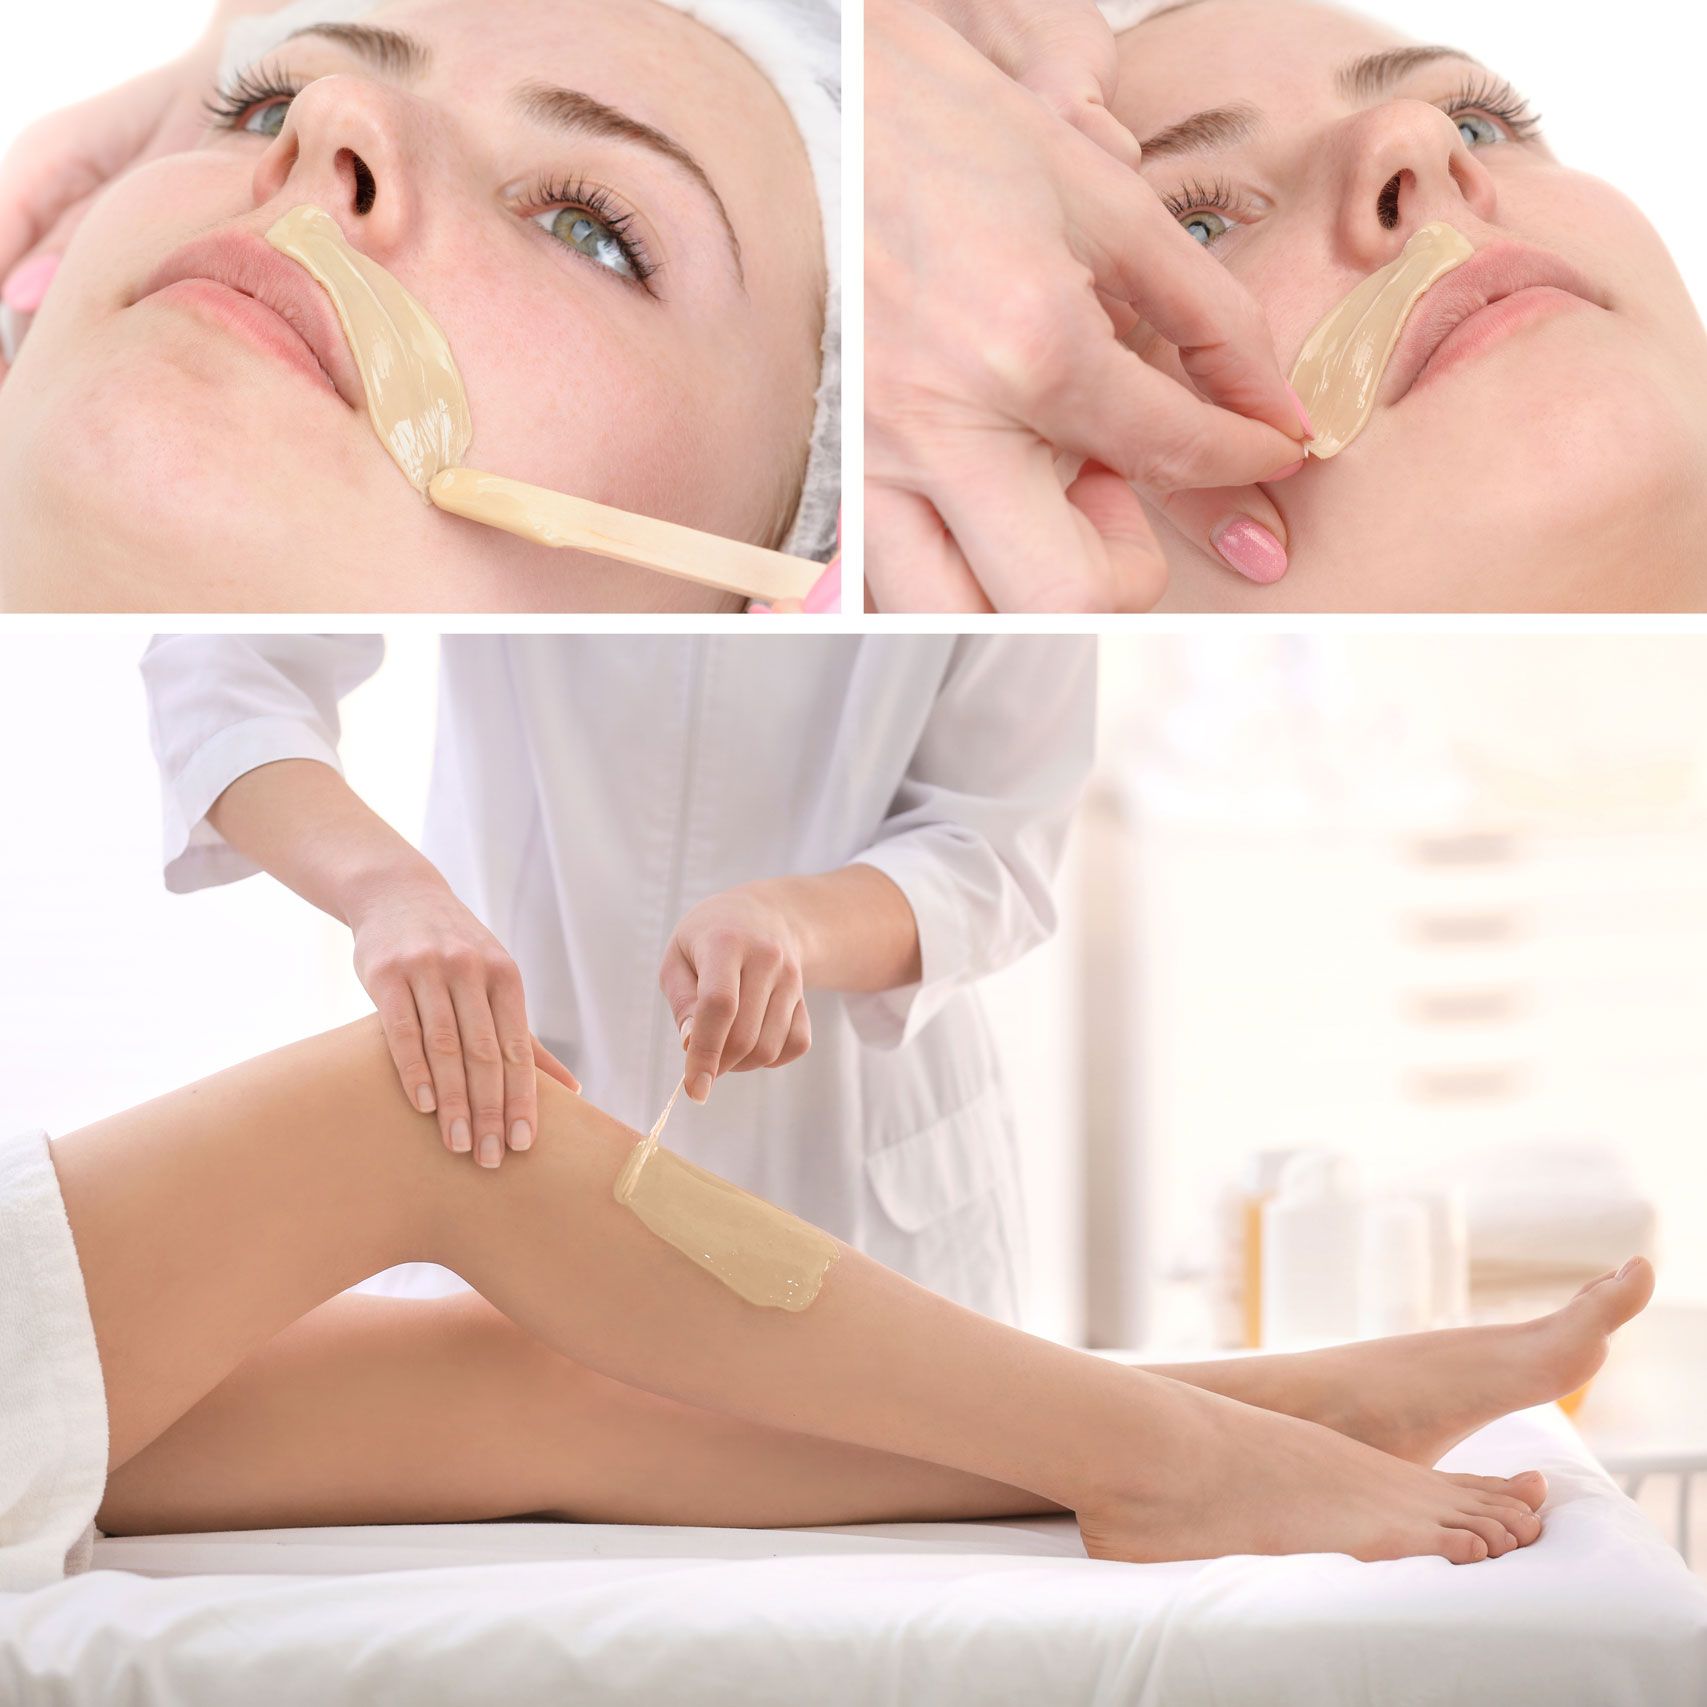 series of images of lady having upper lip and legs professionally waxed